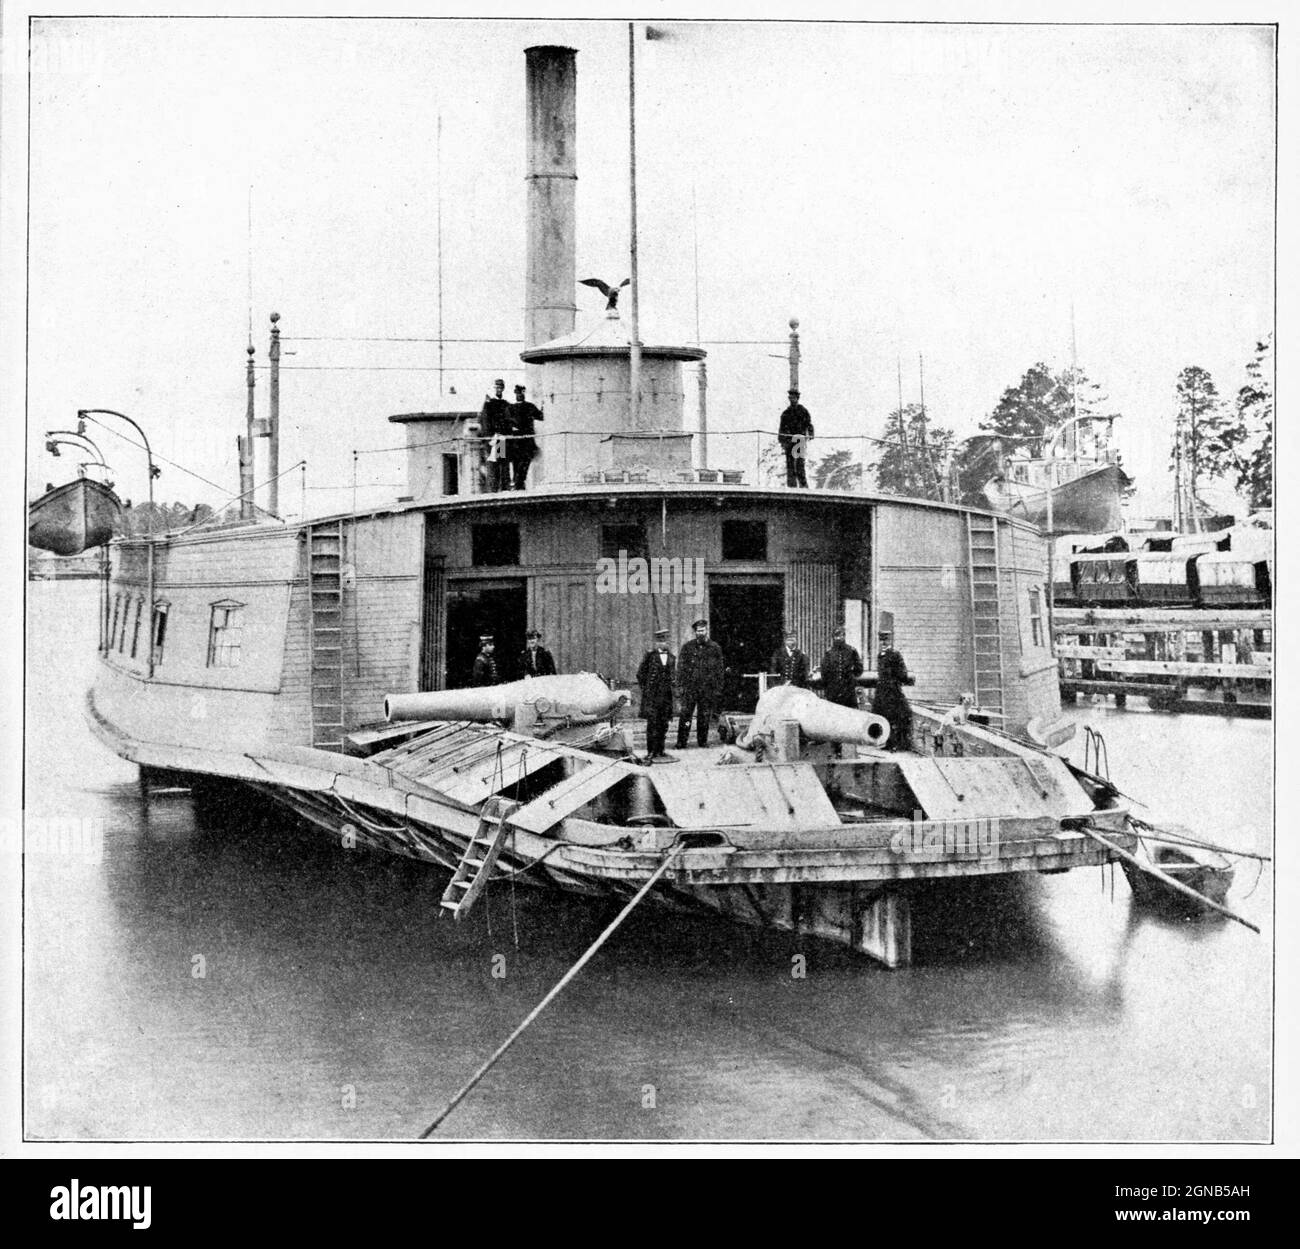 This craft, the Commodore Perry, was an old New York ferryboat purchased and hastily pressed into service by the Federal navy to help solve the problem of patrolling the three thousand miles of coast, along which the blockade must be made effective. from the book ' The Civil war through the camera ' hundreds of vivid photographs actually taken in Civil war times, sixteen reproductions in color of famous war paintings. The new text history by Henry W. Elson. A. complete illustrated history of the Civil war Stock Photo